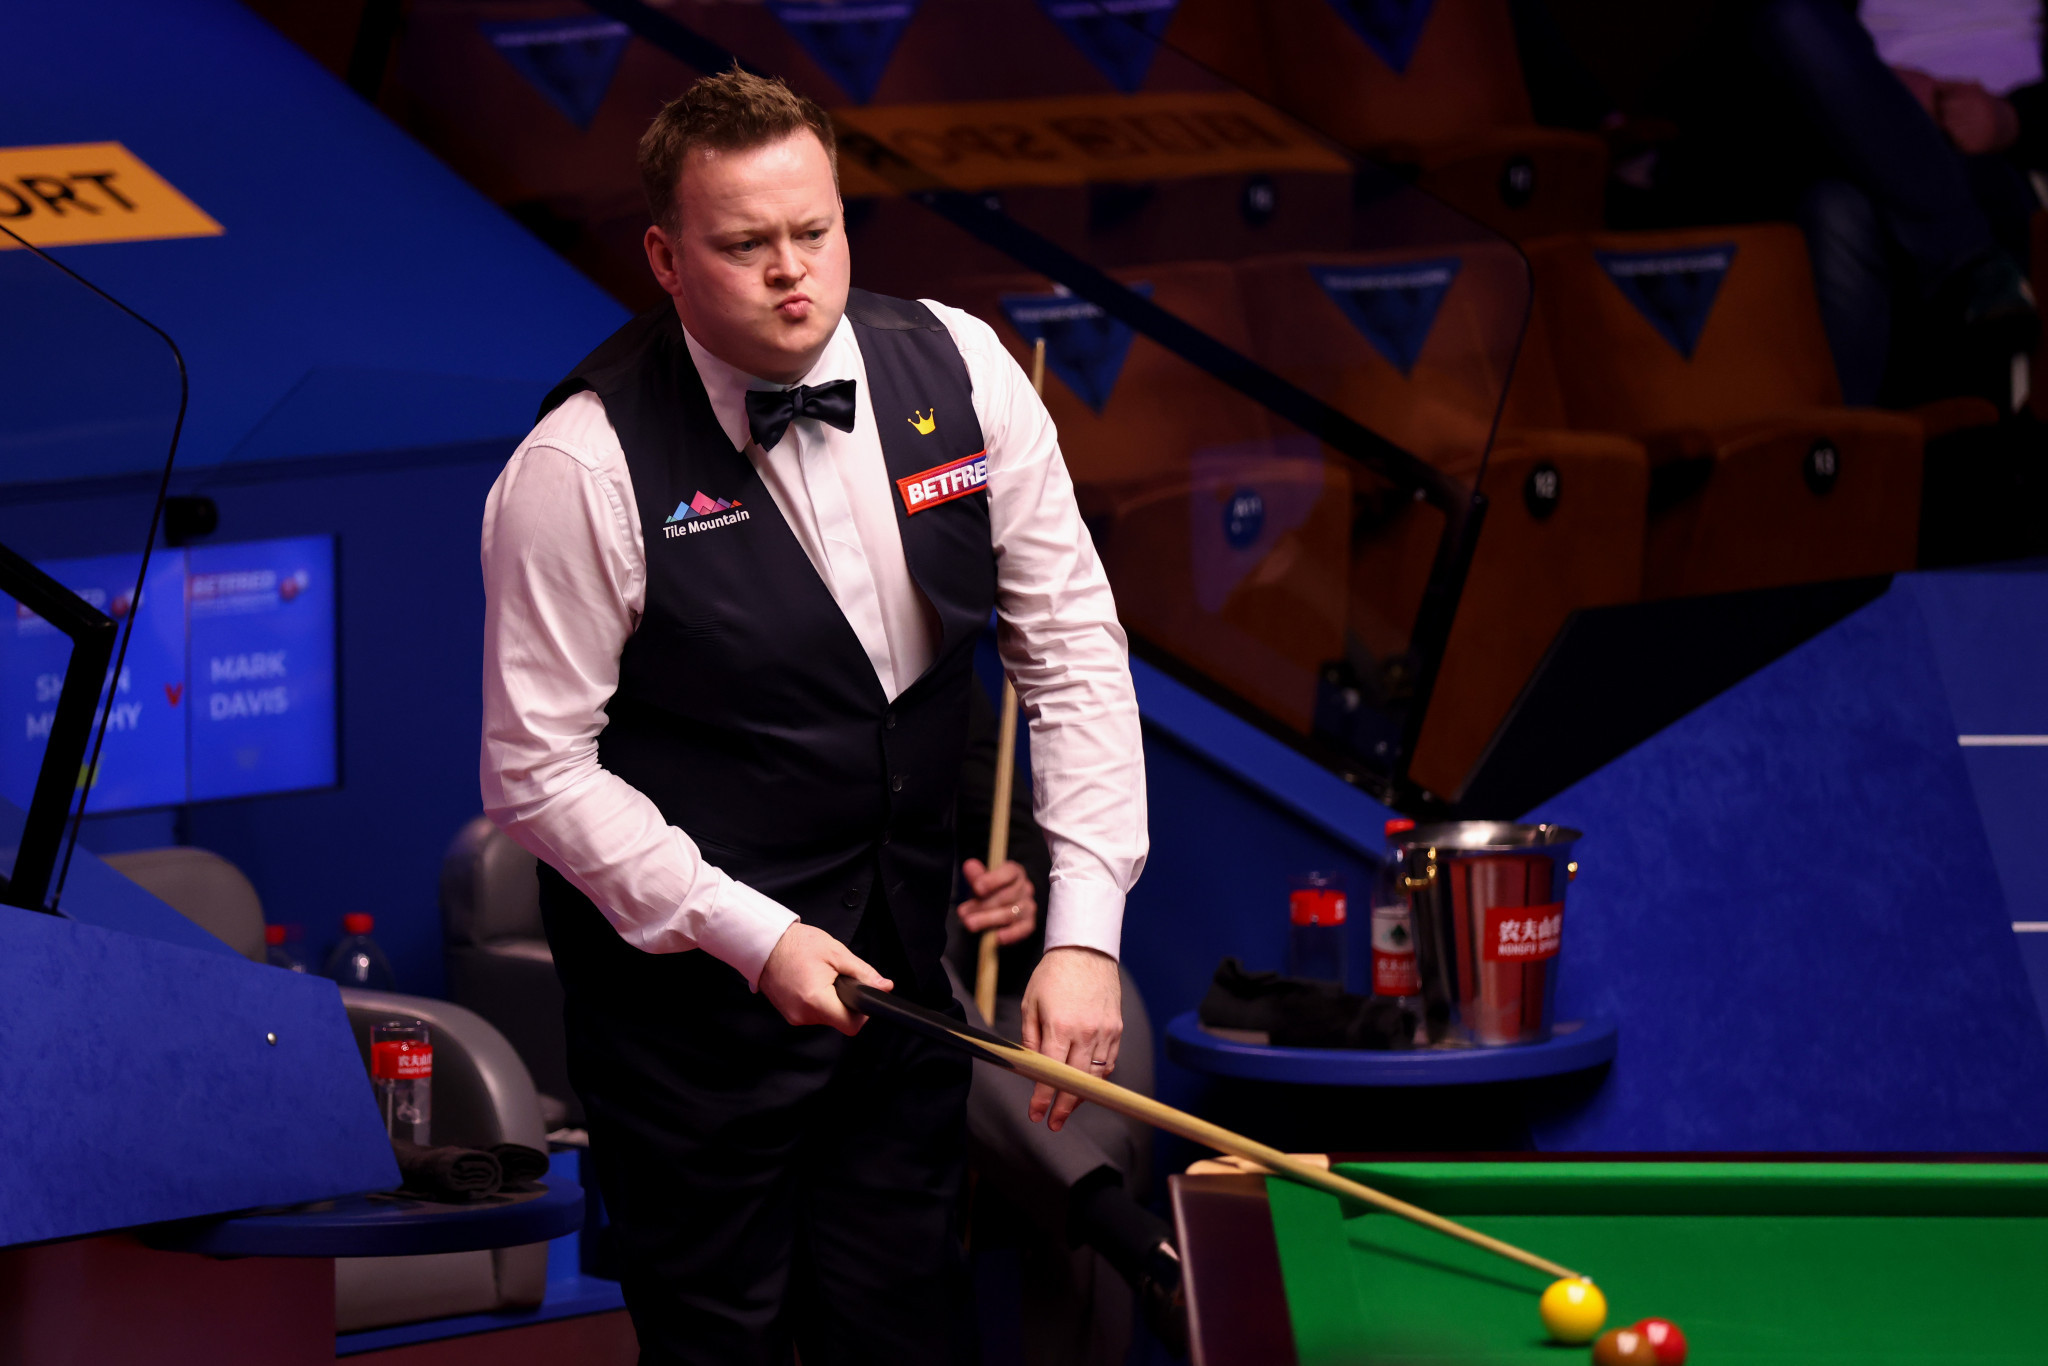 Shaun Murphy overturned a 5-4 deficit to beat Mark Davis 10-7 and book his place in the second round of the World Snooker Championship ©Getty Images